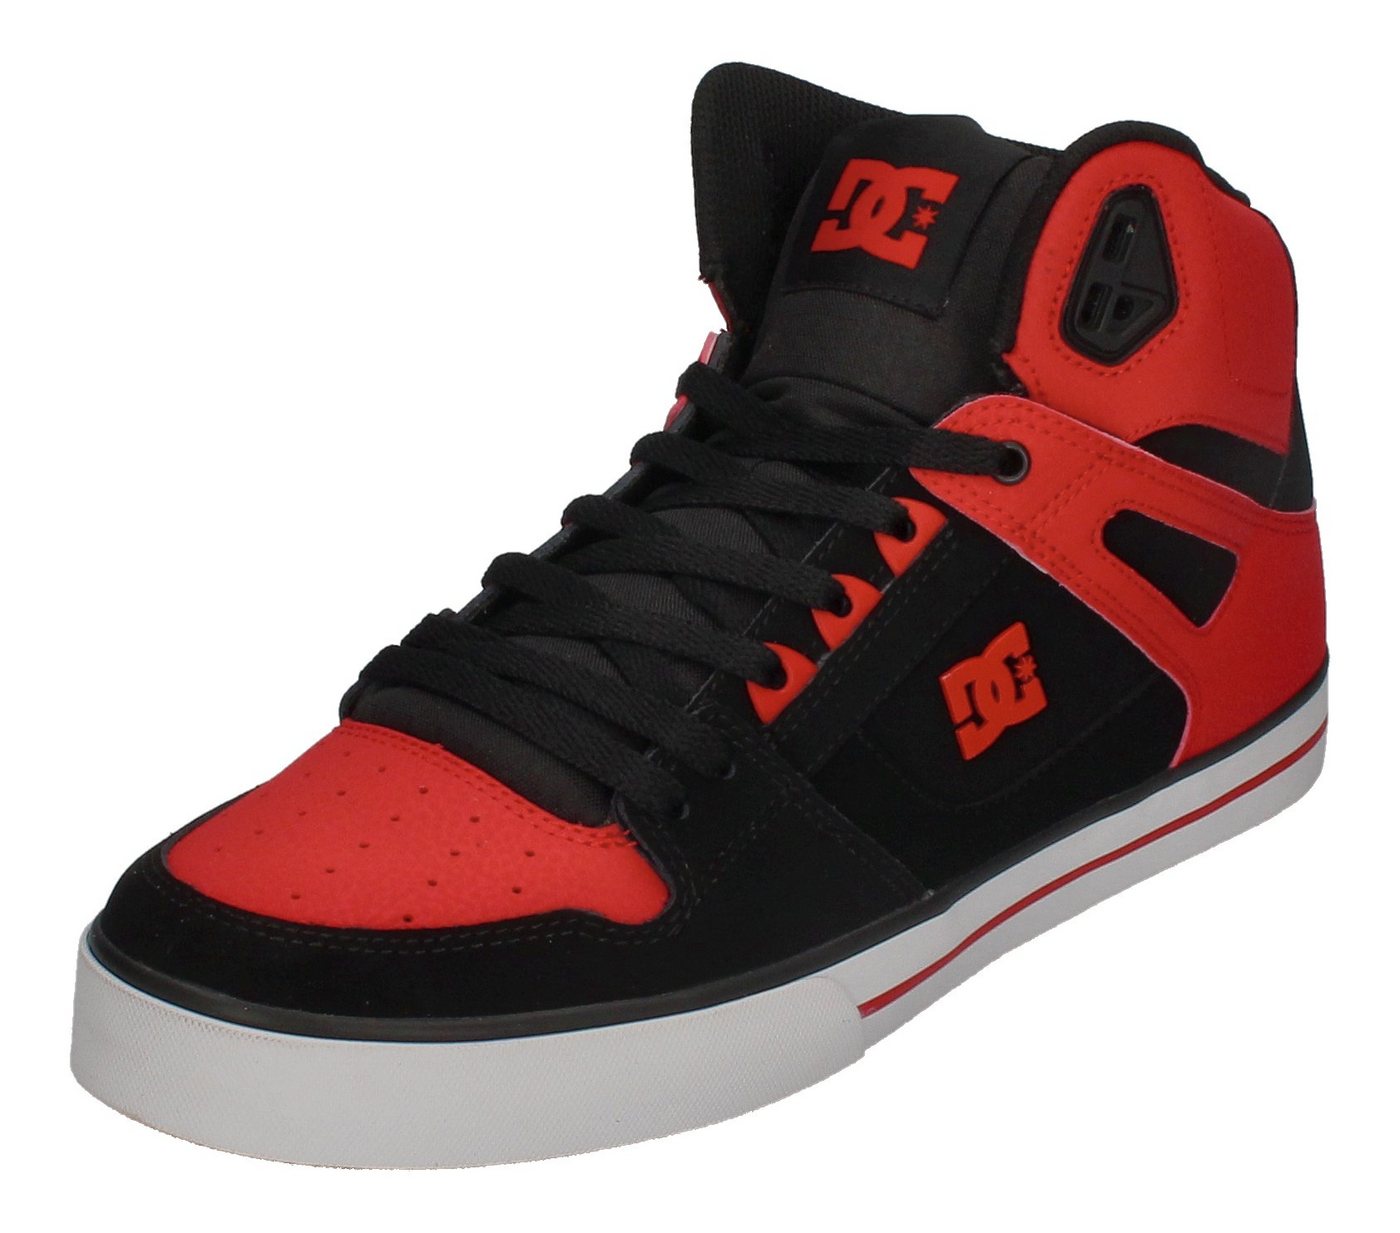 DC Shoes Pure HT WC ADYS400043 Skateschuh fiery red white black von DC Shoes